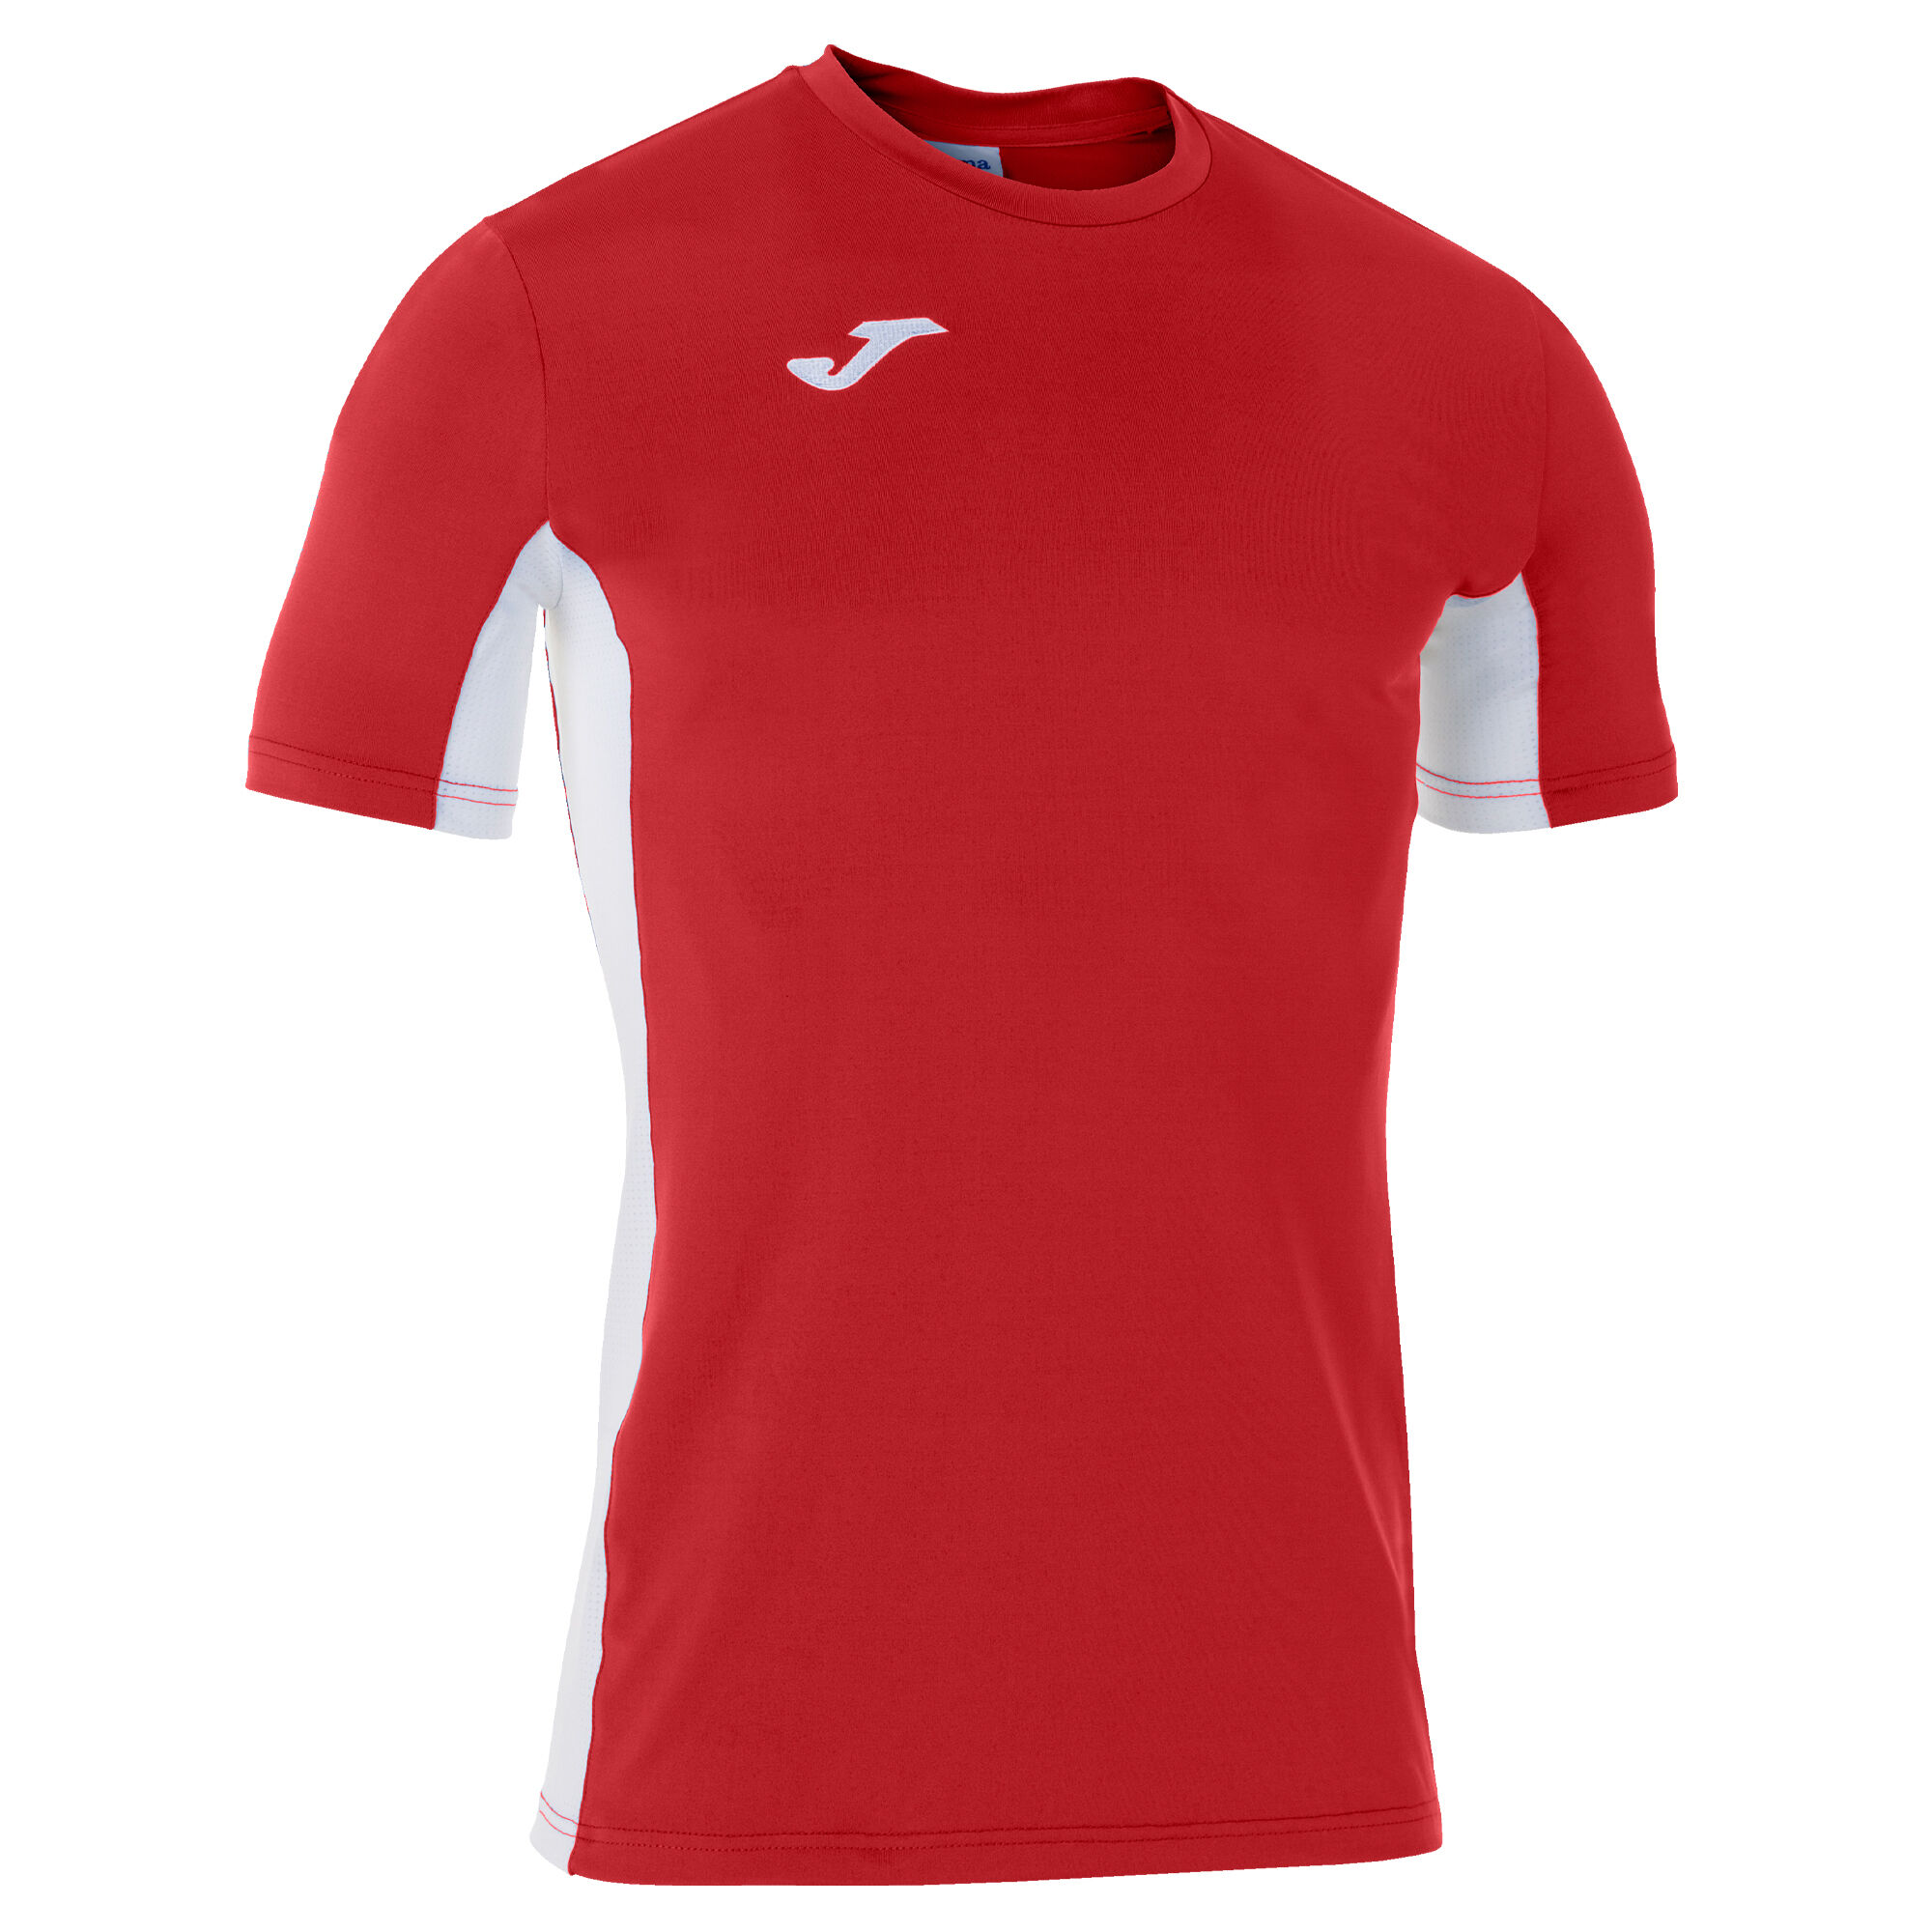 Maillot manches courtes homme Superliga rouge blanc